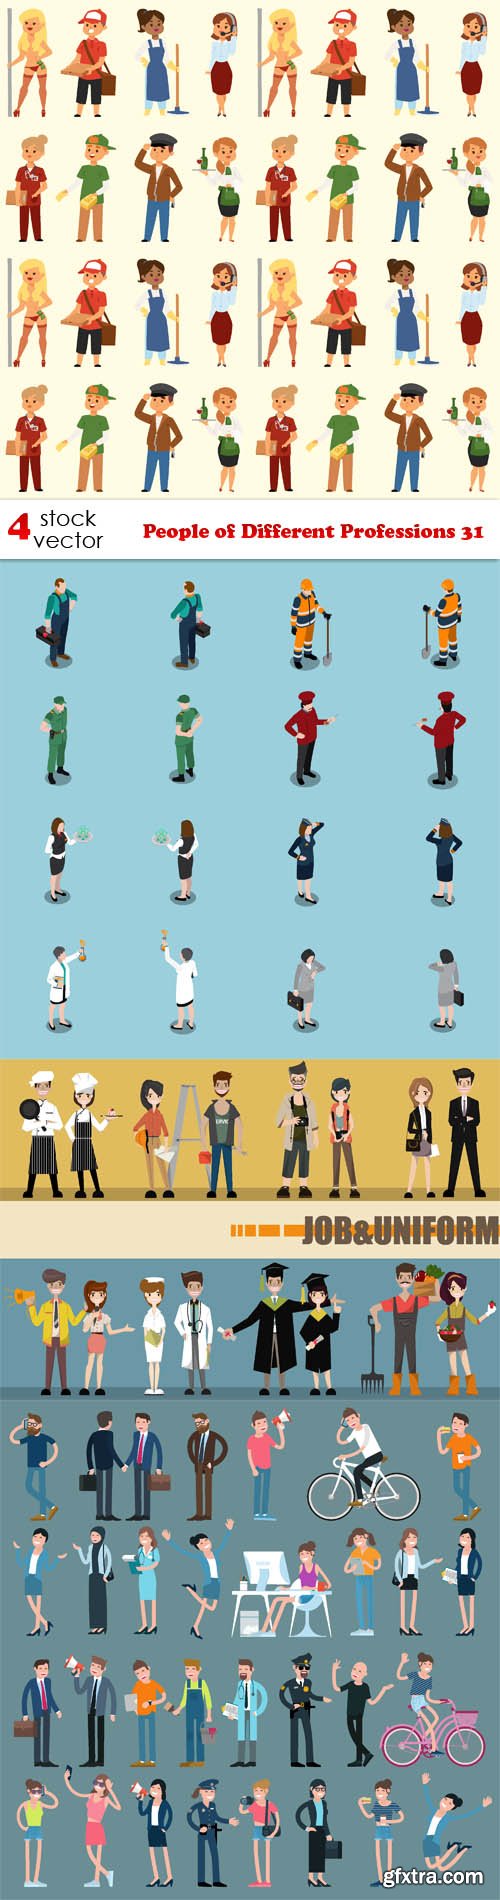 Vectors - People of Different Professions 31